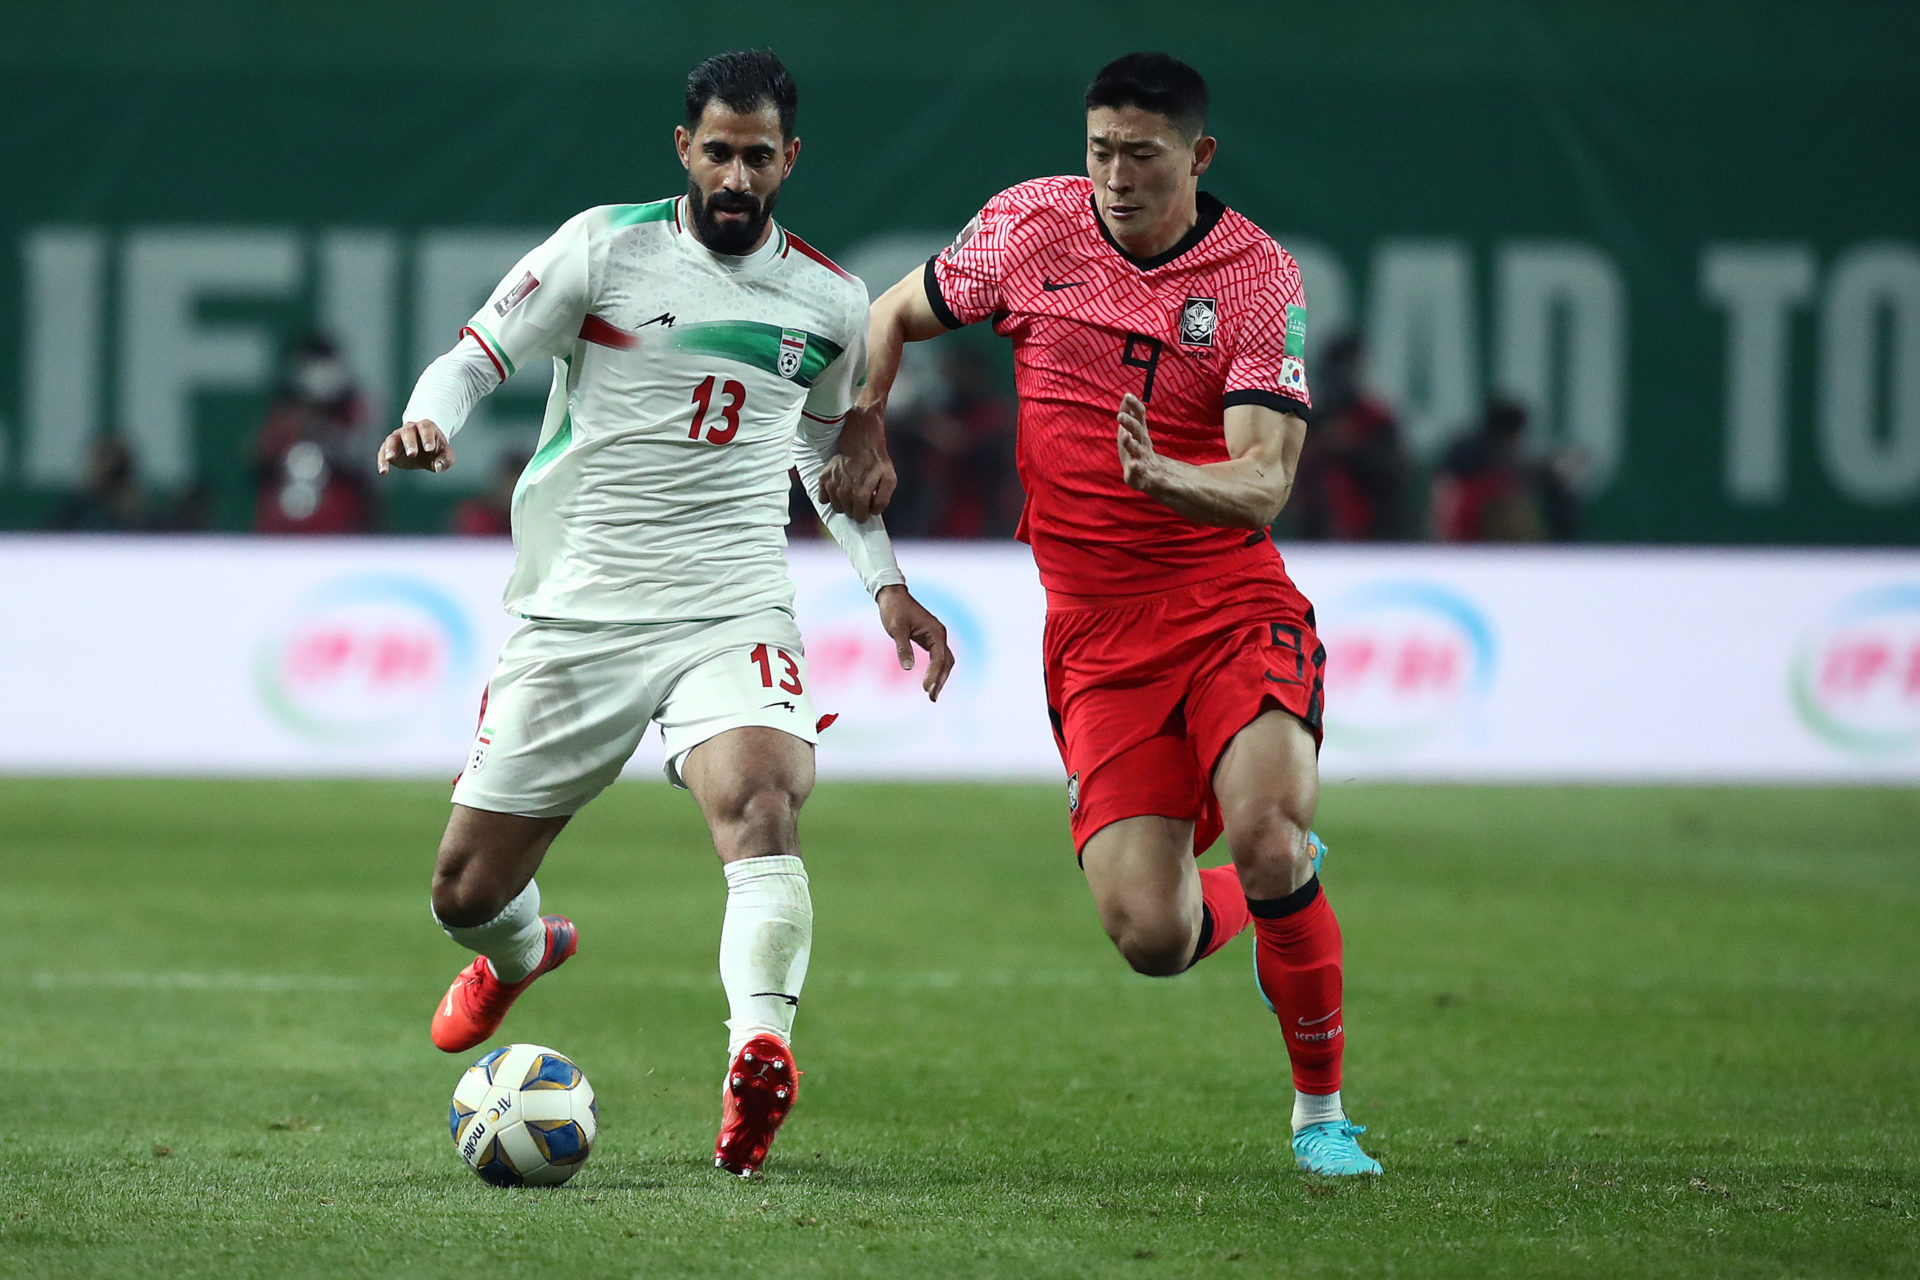 South Korea v Iran - FIFA World Cup Asian Qualifier Final Round Group A